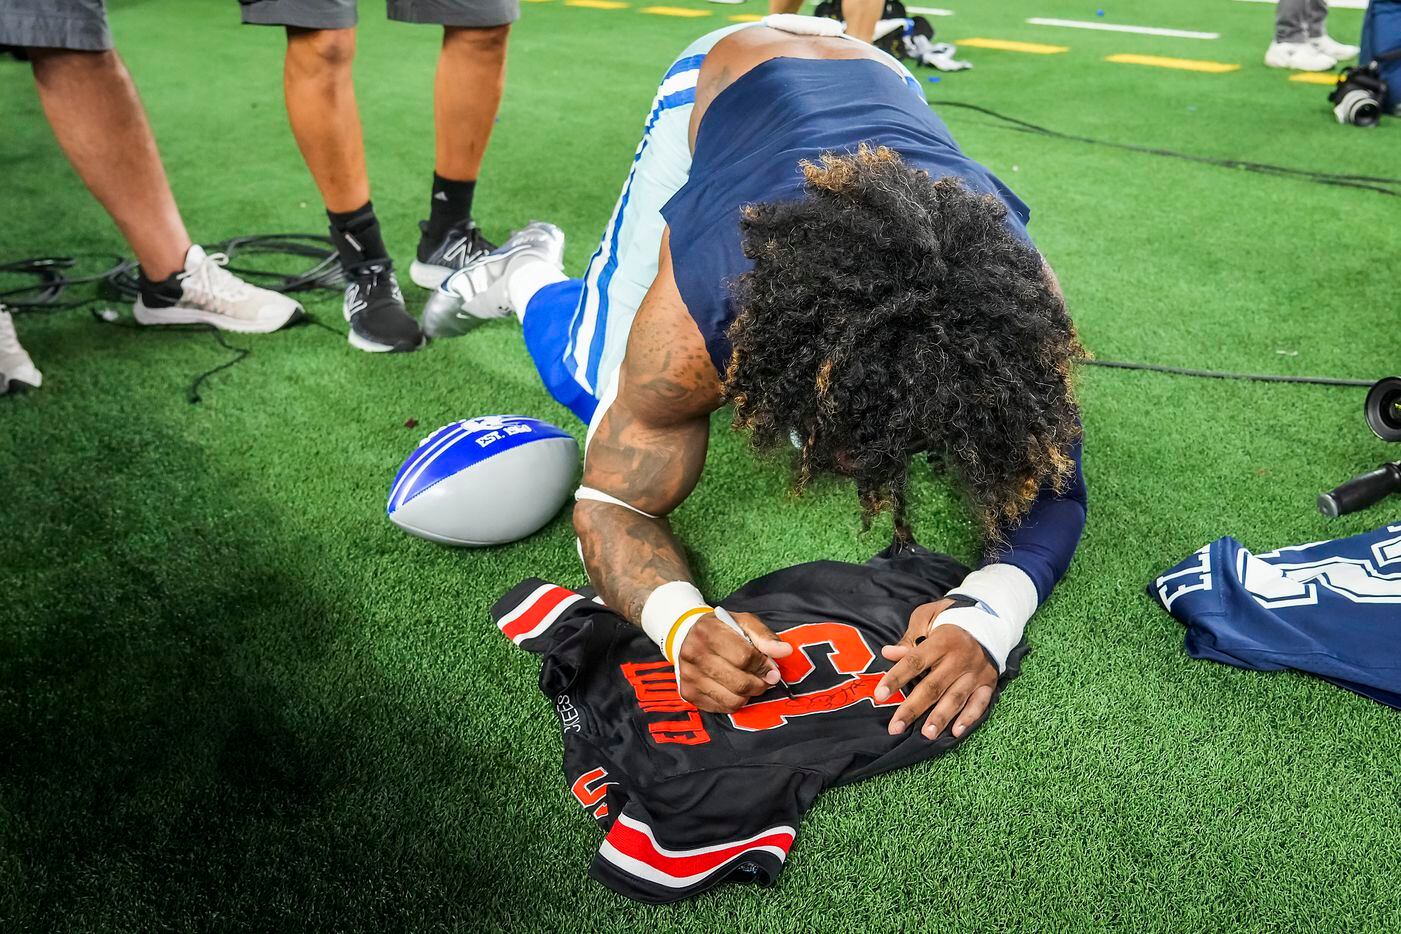 Dallas Cowboys running back Ezekiel Elliott autographs a jersey for a fan as he leaves the field following a victory over the Washington Football Team in an NFL football game at AT&T Stadium on Sunday, Dec. 26, 2021, in Arlington. The Cowboys won the game 56-14.